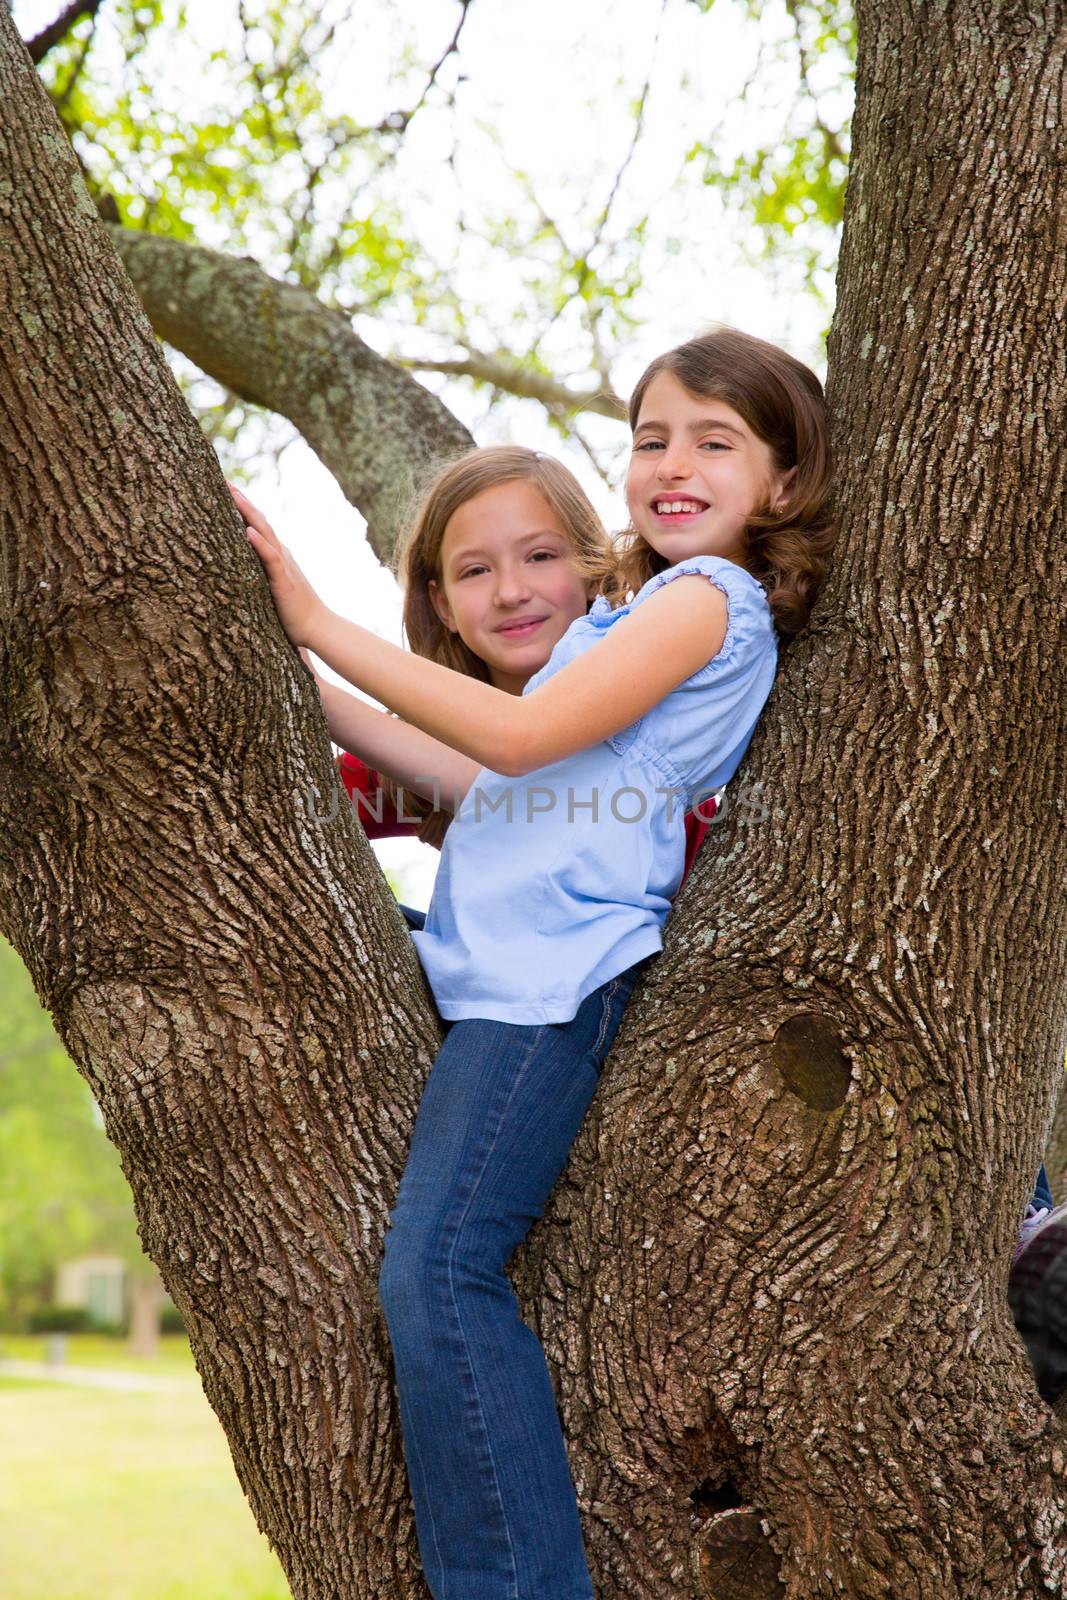 children girls playing climbing to a tree park outdoor